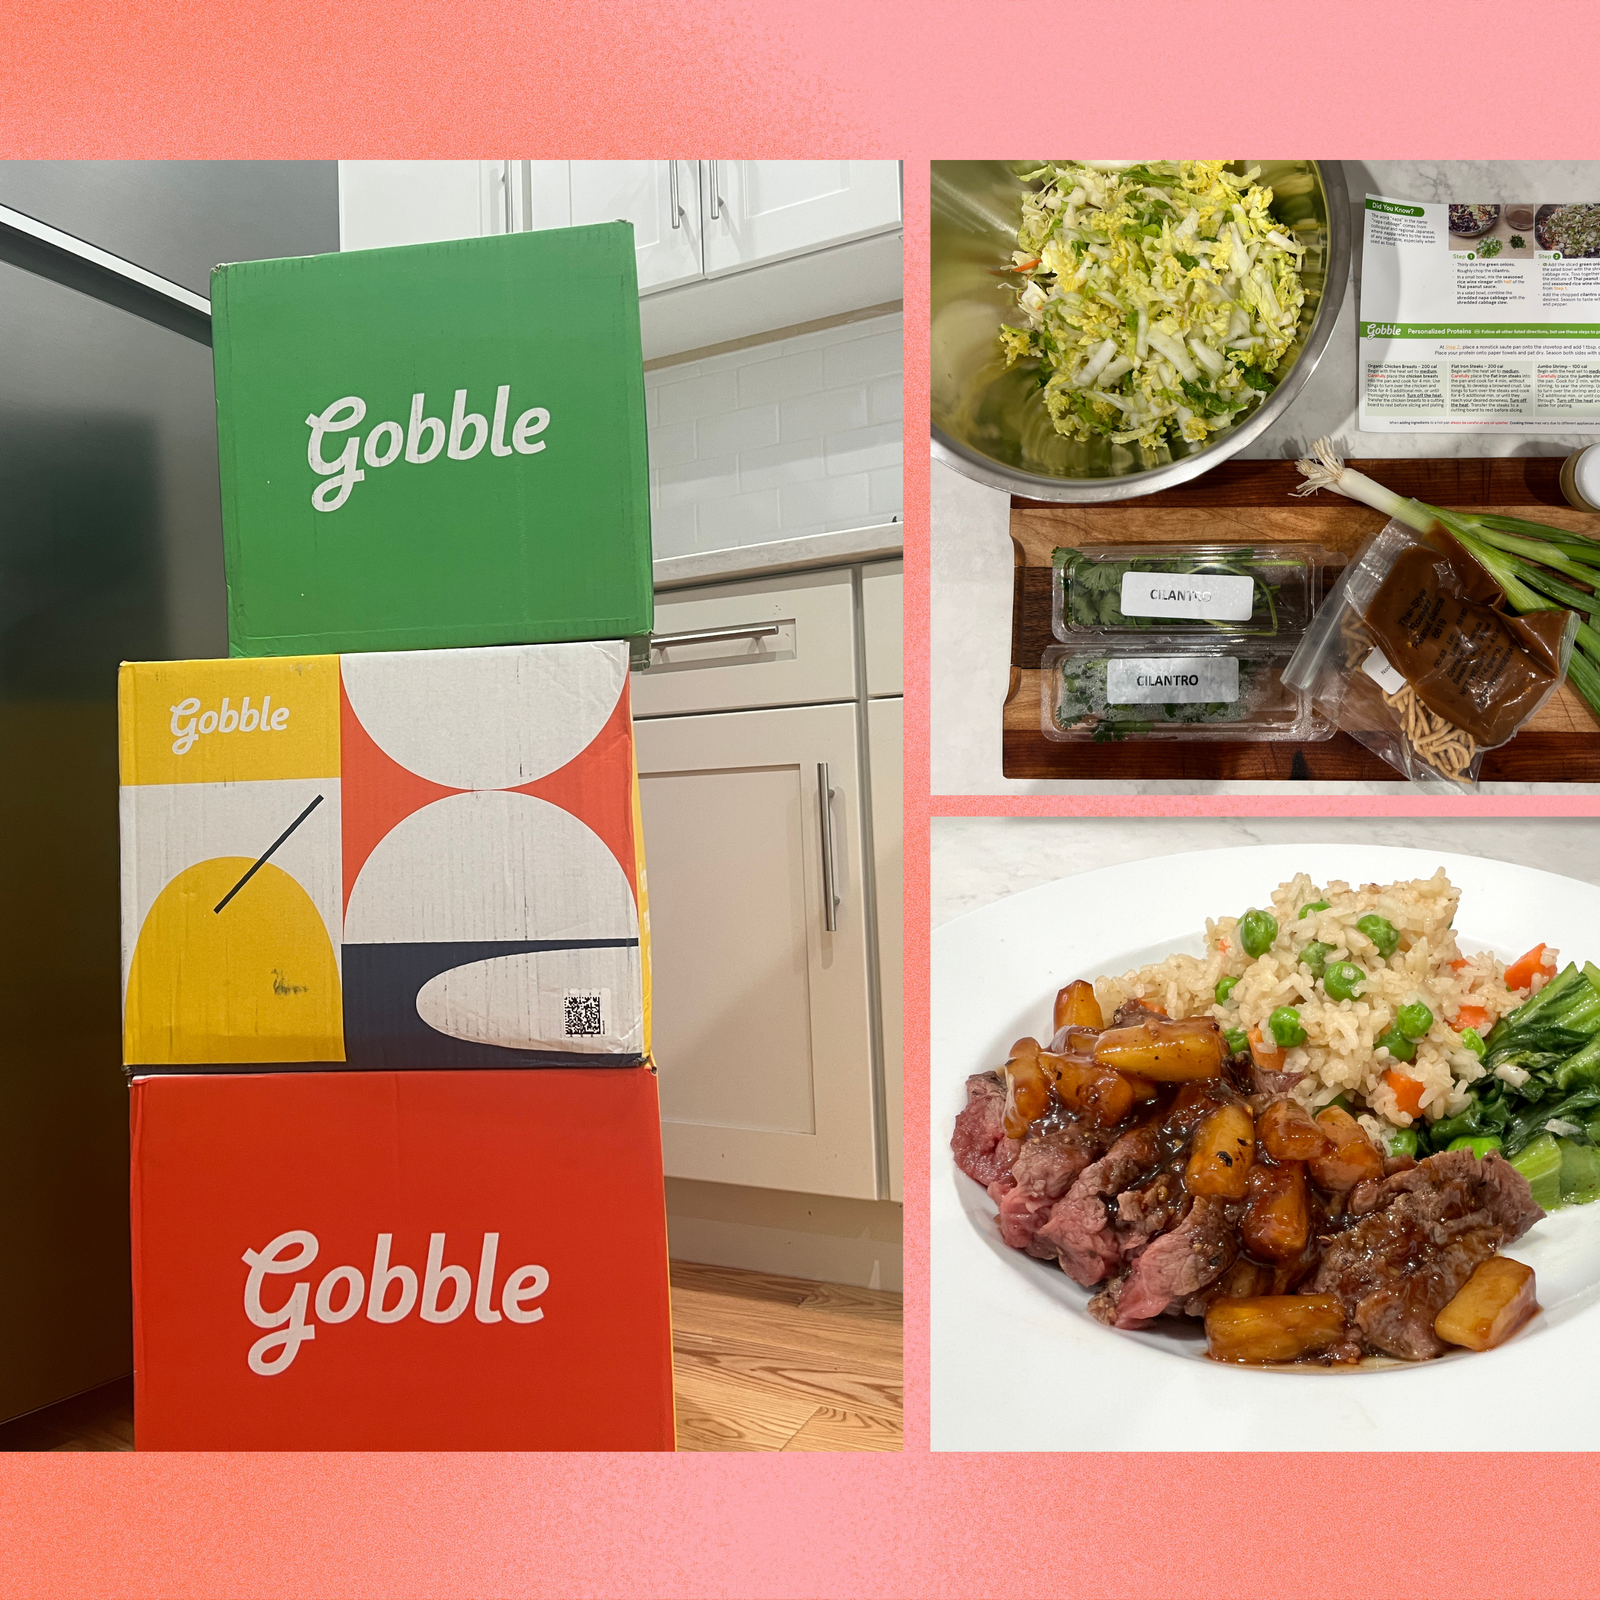 I Tried a 15-Minute Meal Kit Delivery Service&-Here Are My Thoughts